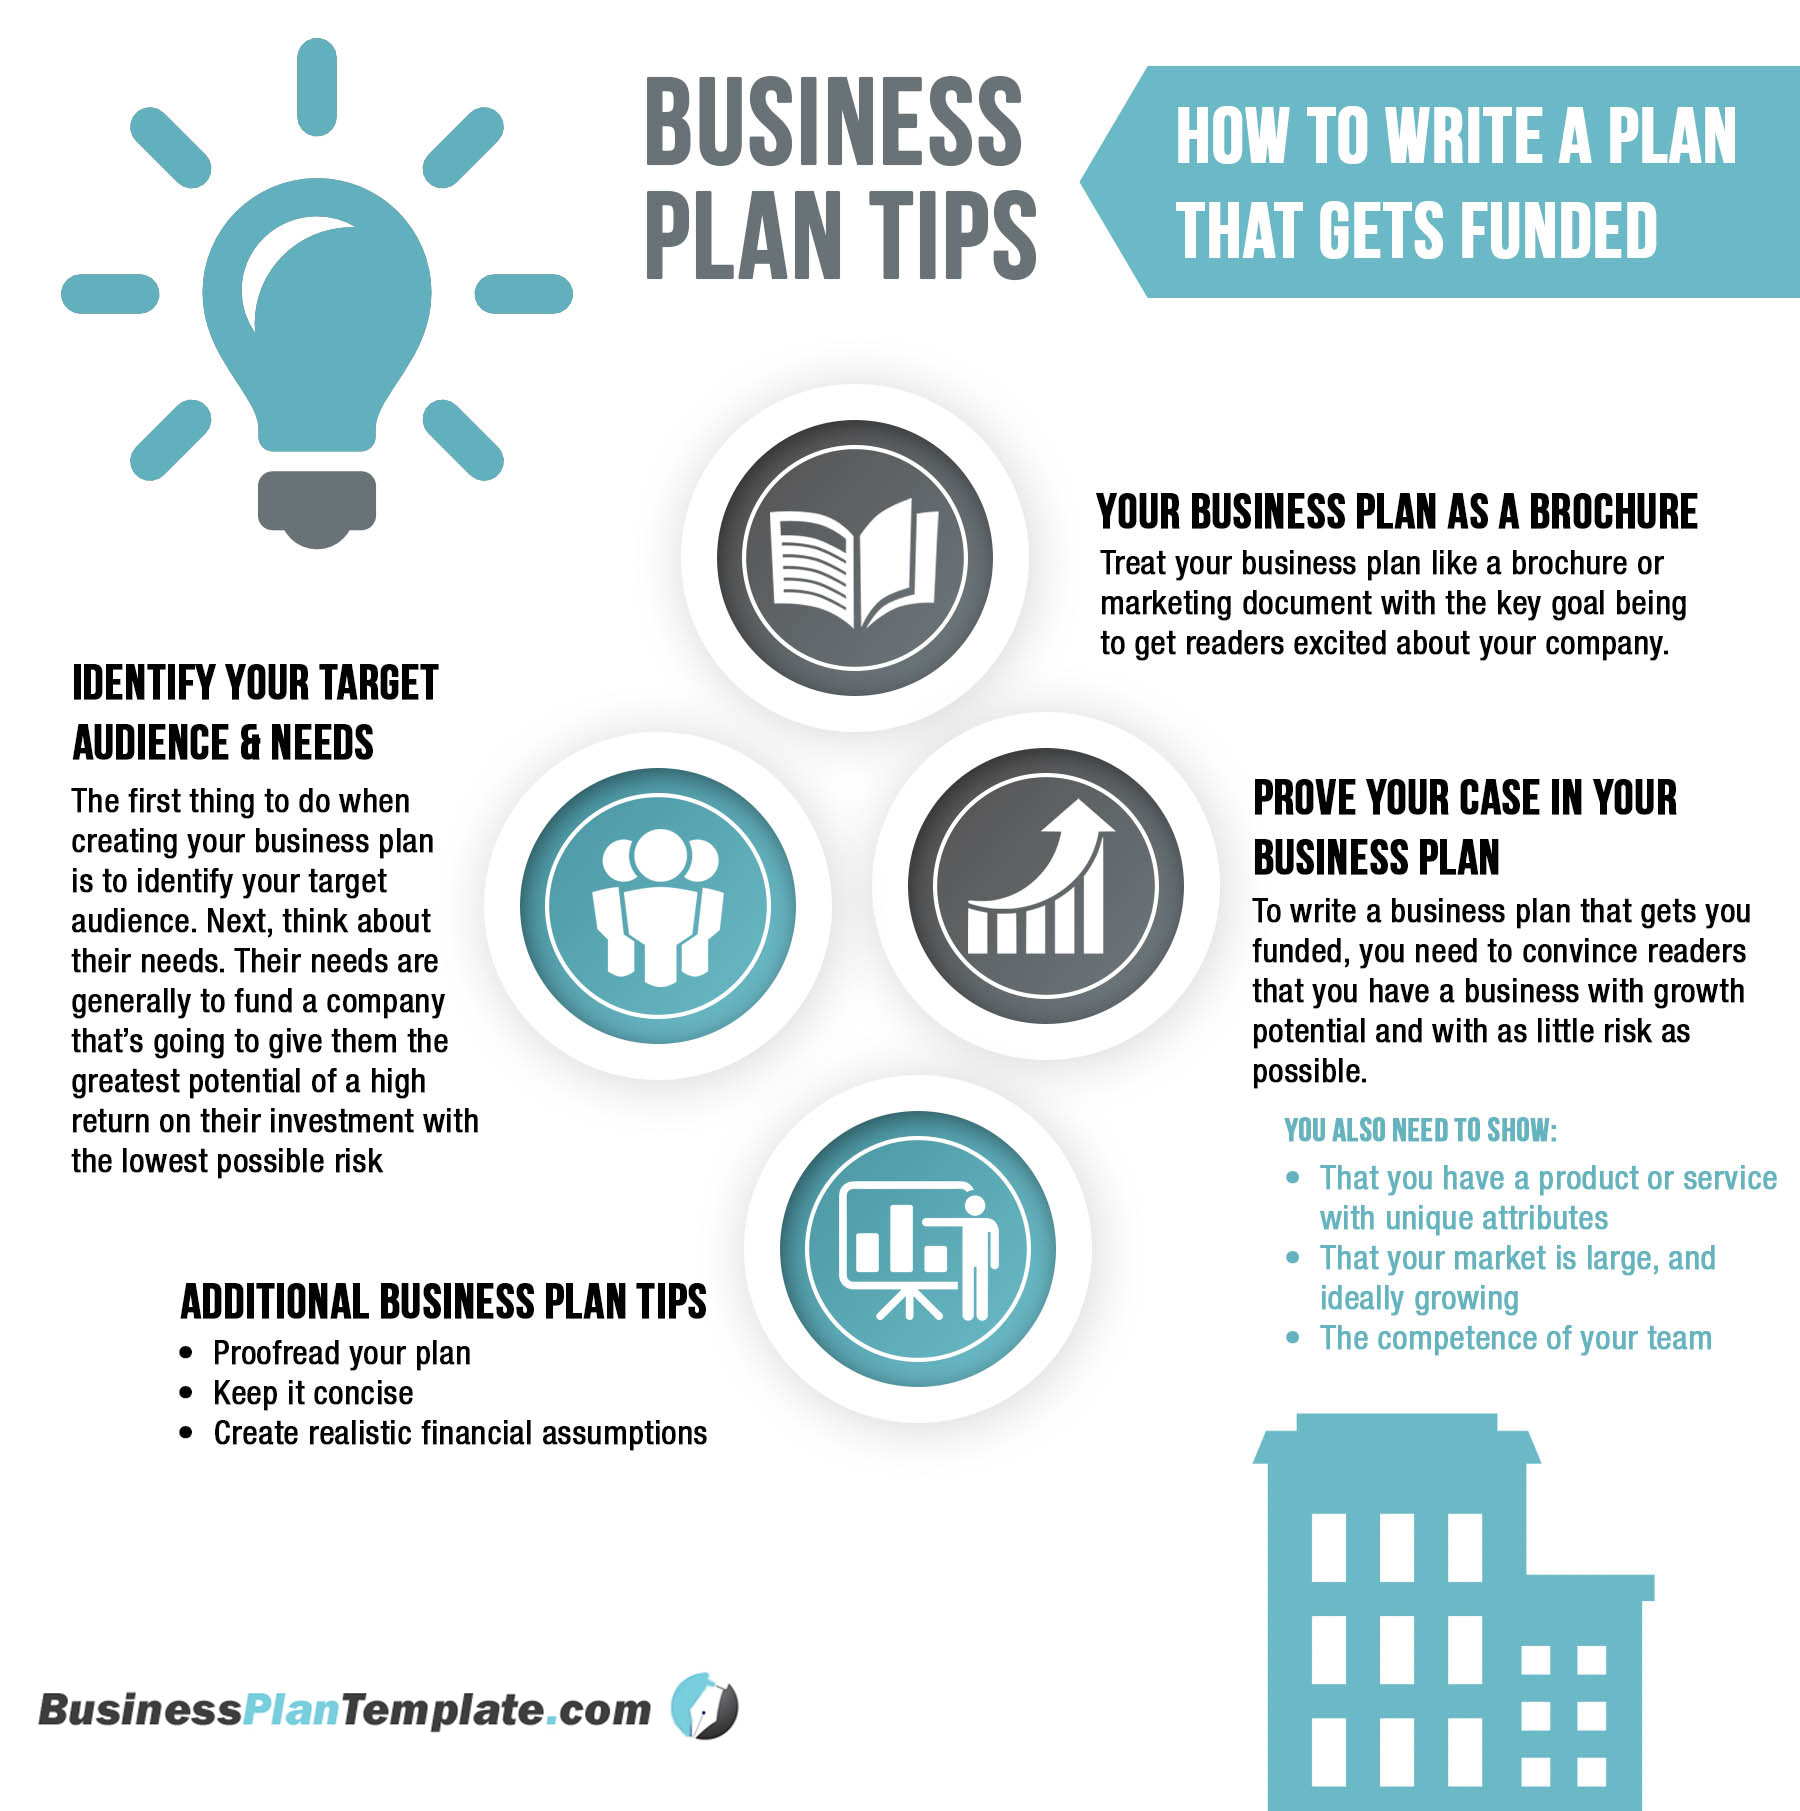 business plan advice tips for buying